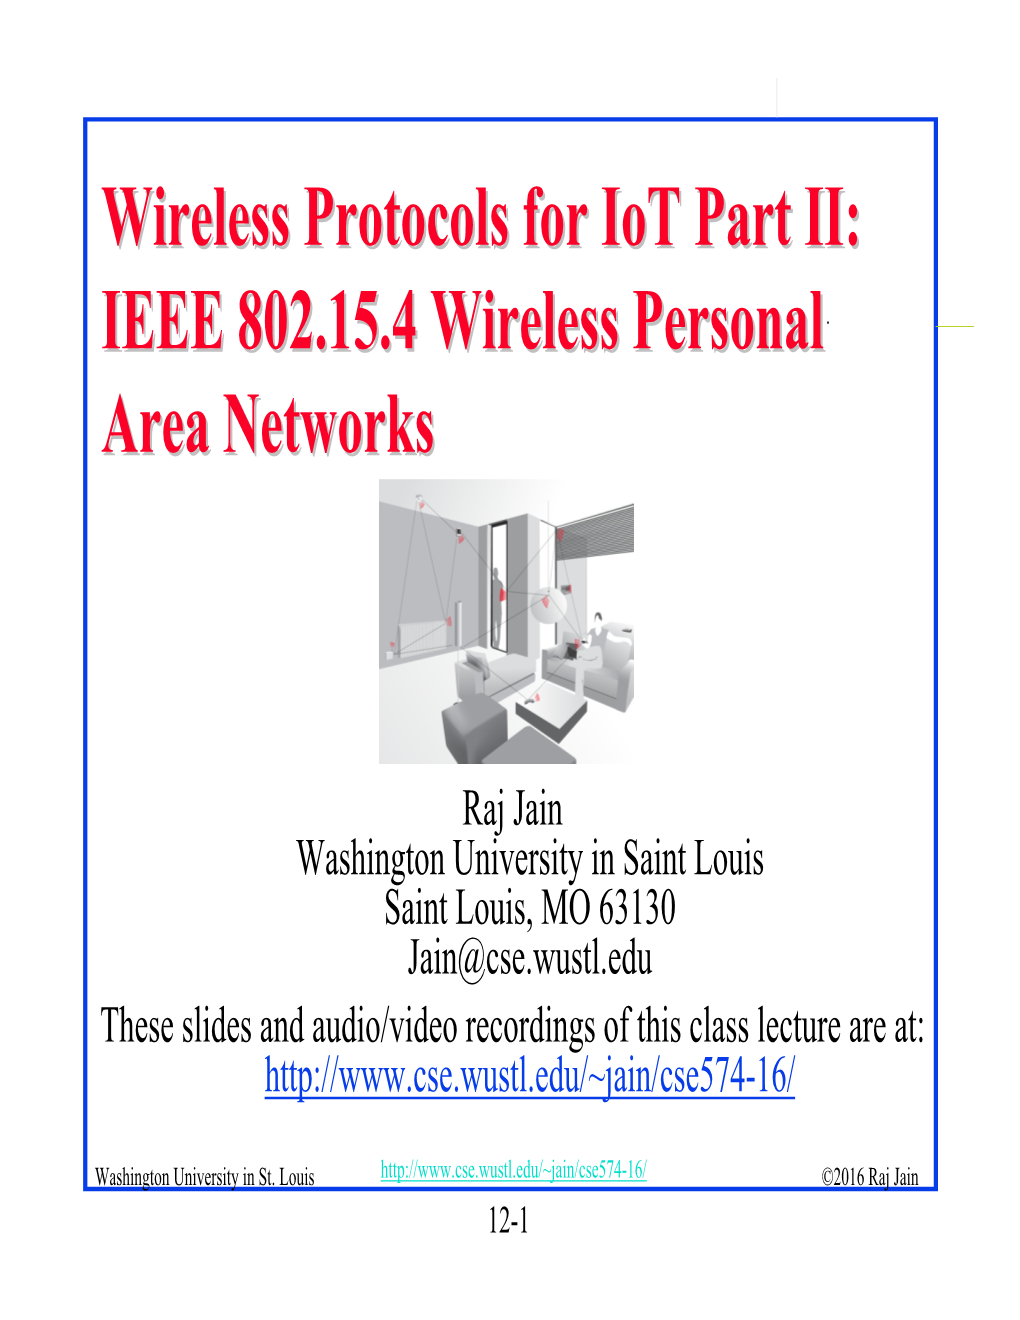 Wireless Protocols for Iot Part II: IEEE 802.15.4 Wireless Personal Area